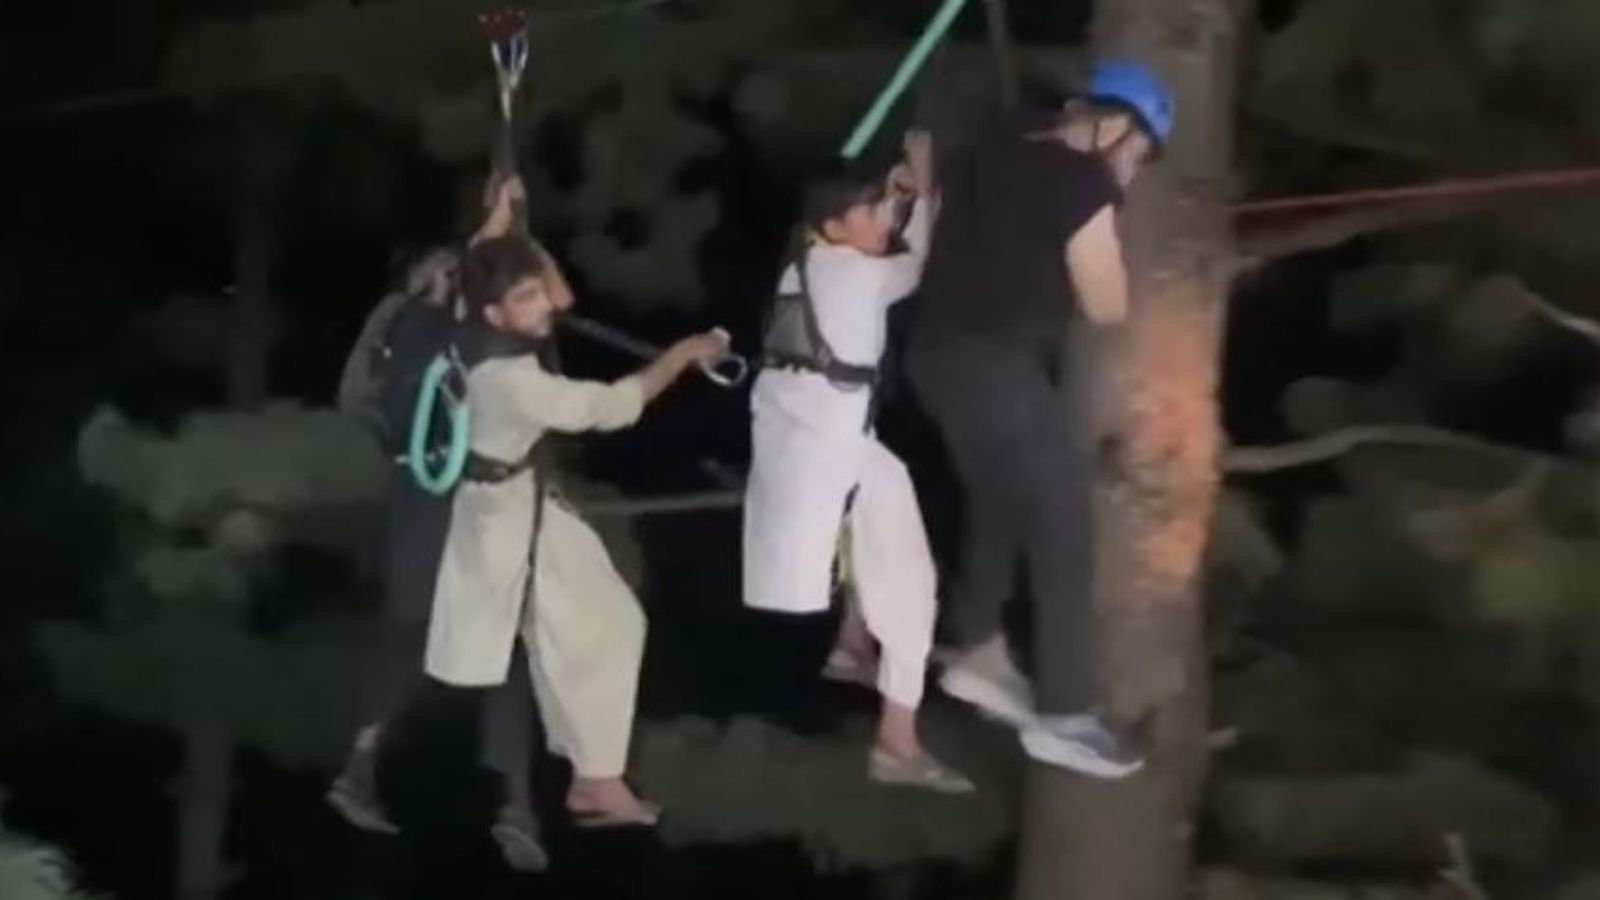 Pakistan: All eight people rescued from broken cable car dangling 274m above canyon